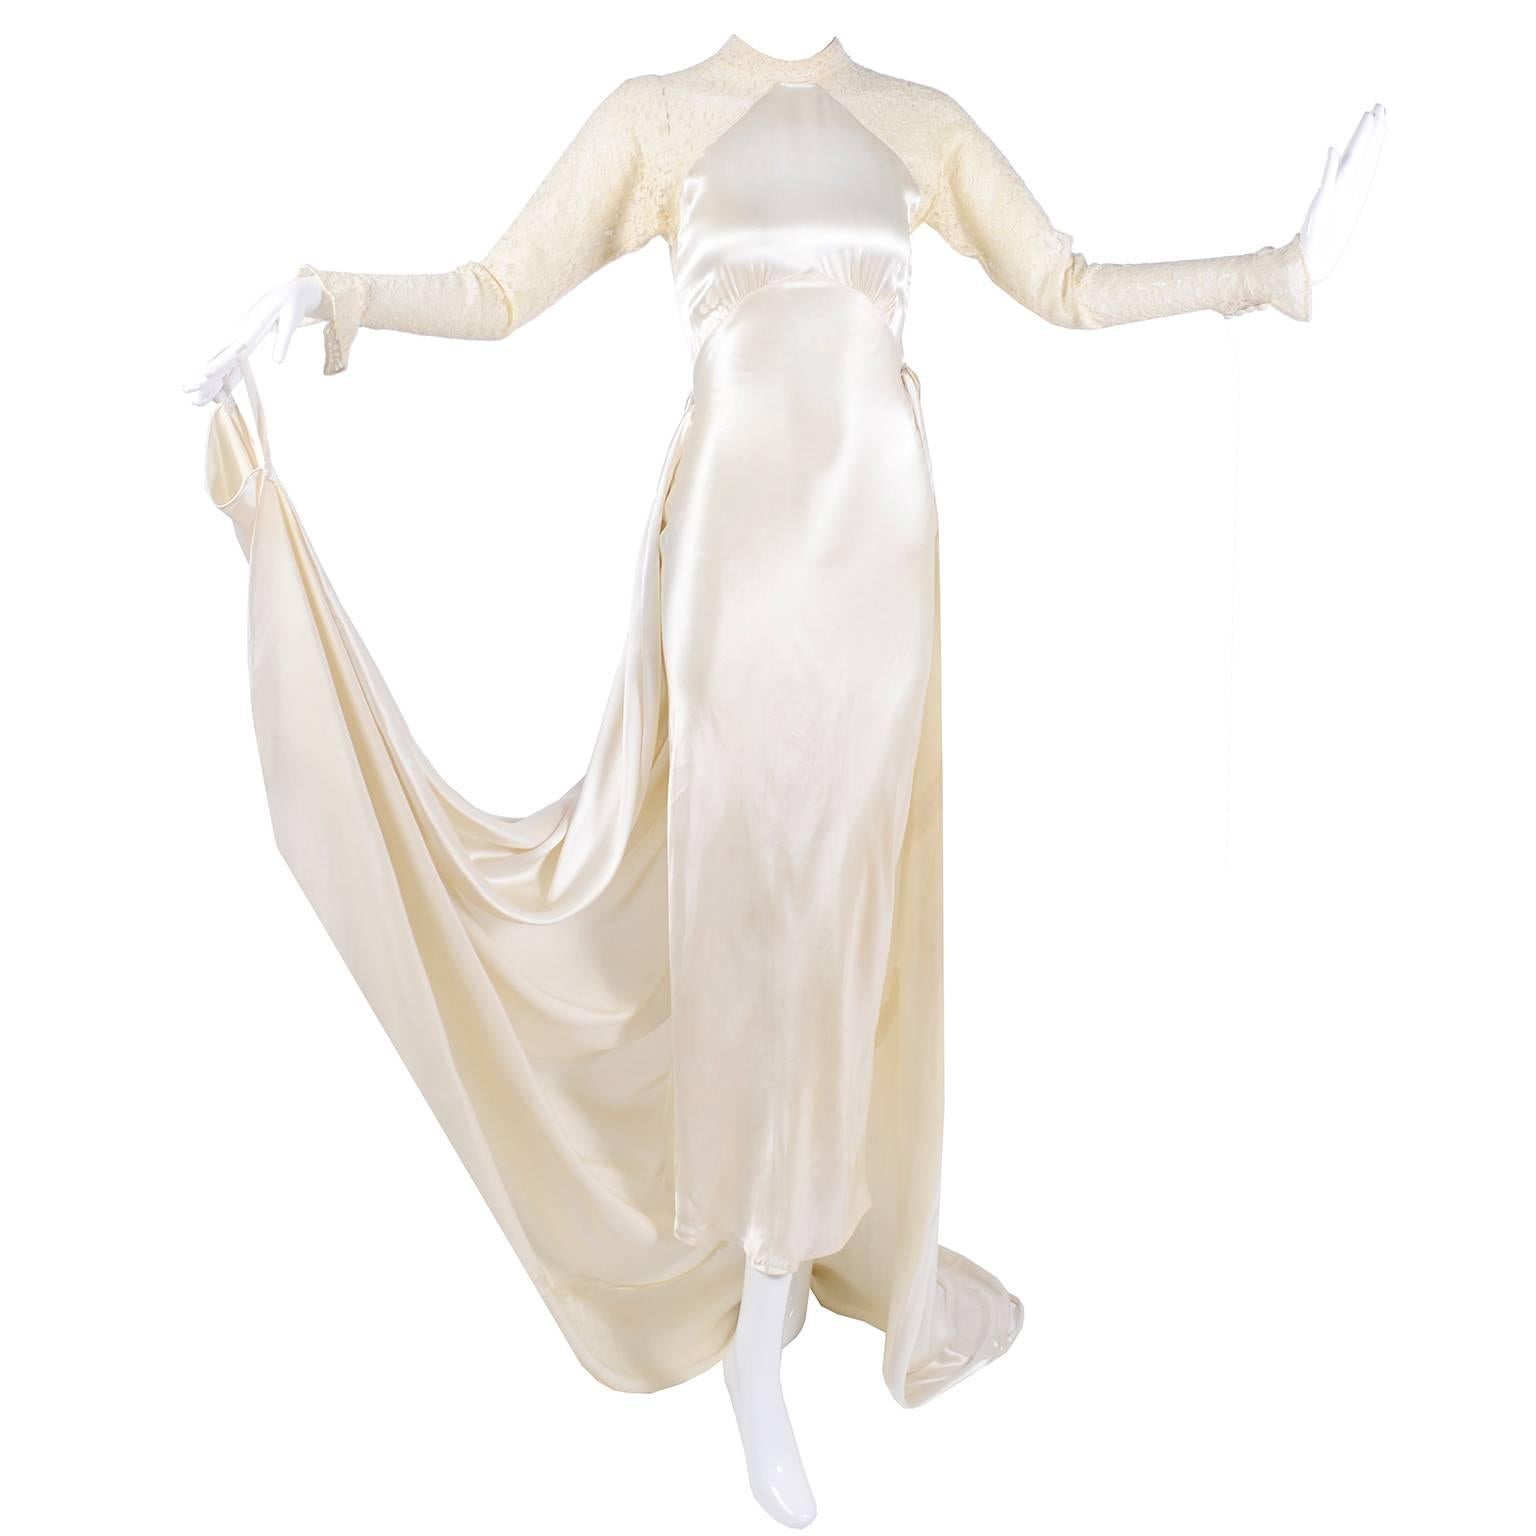 Wedding Gown Vintage Dress in Champagne Silk Satin With Lace and Train,  1930s